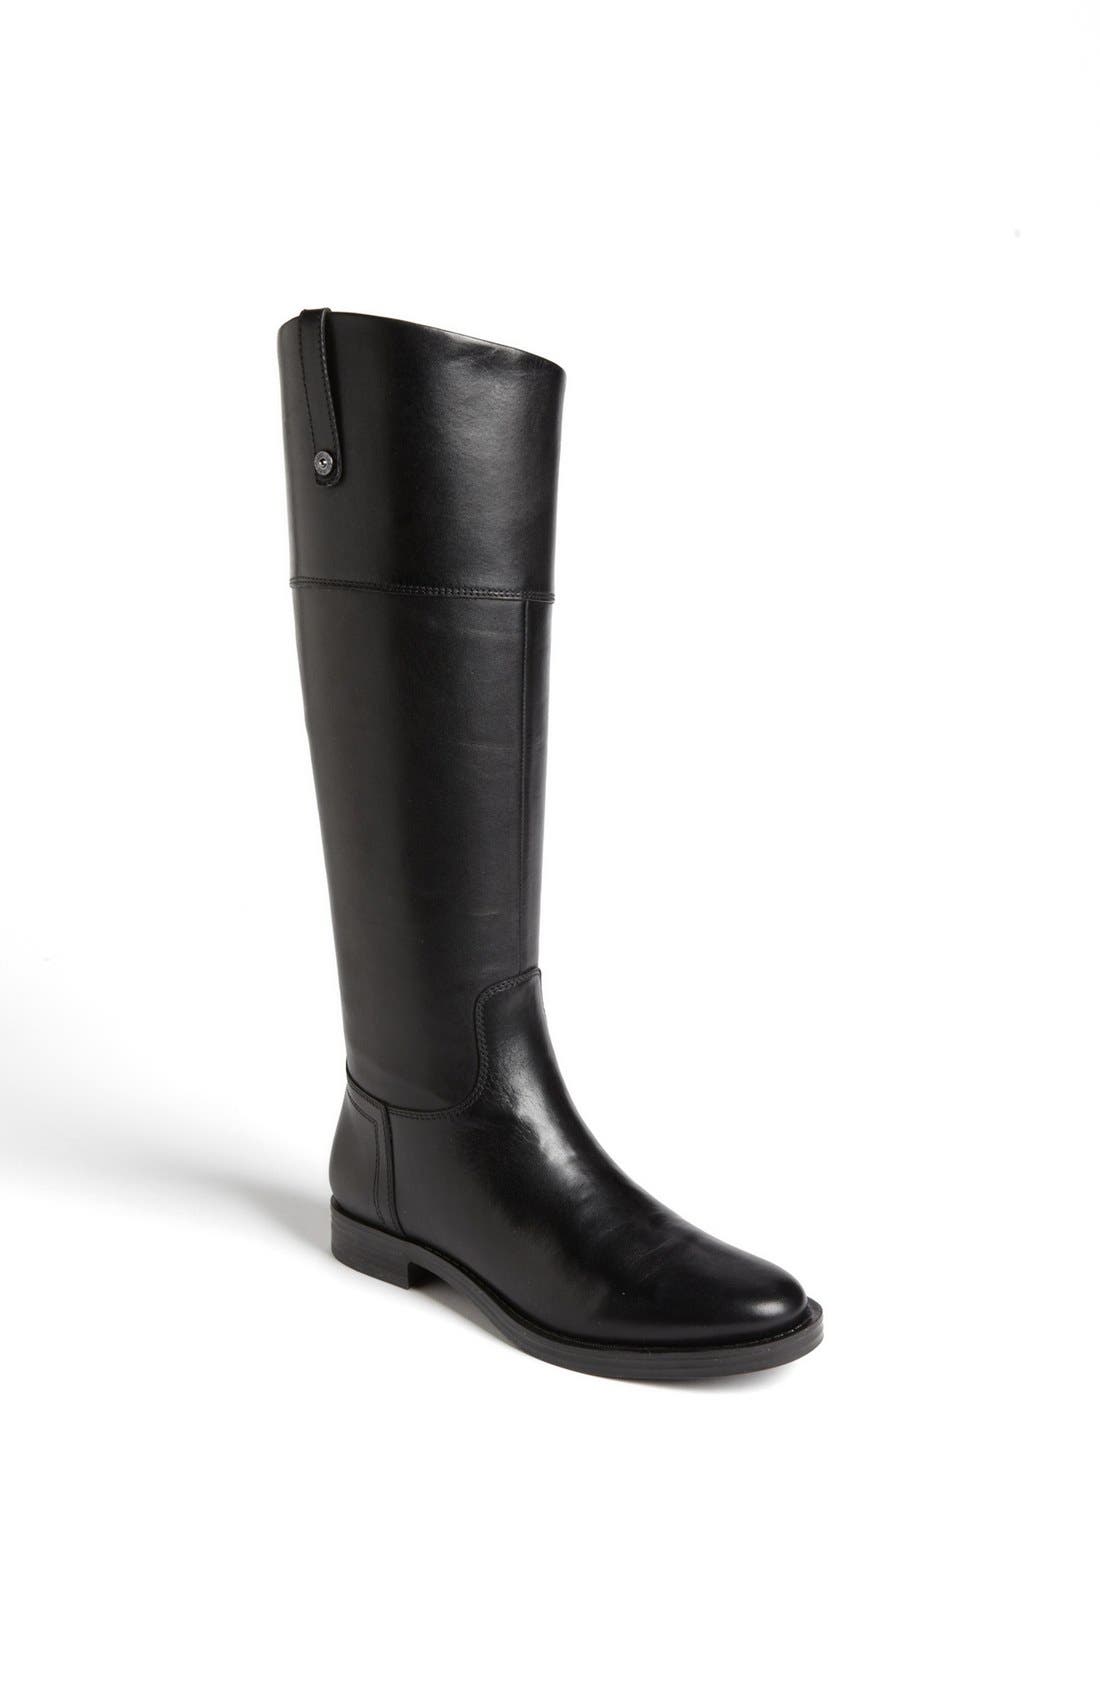 enzo angiolini boots nordstrom